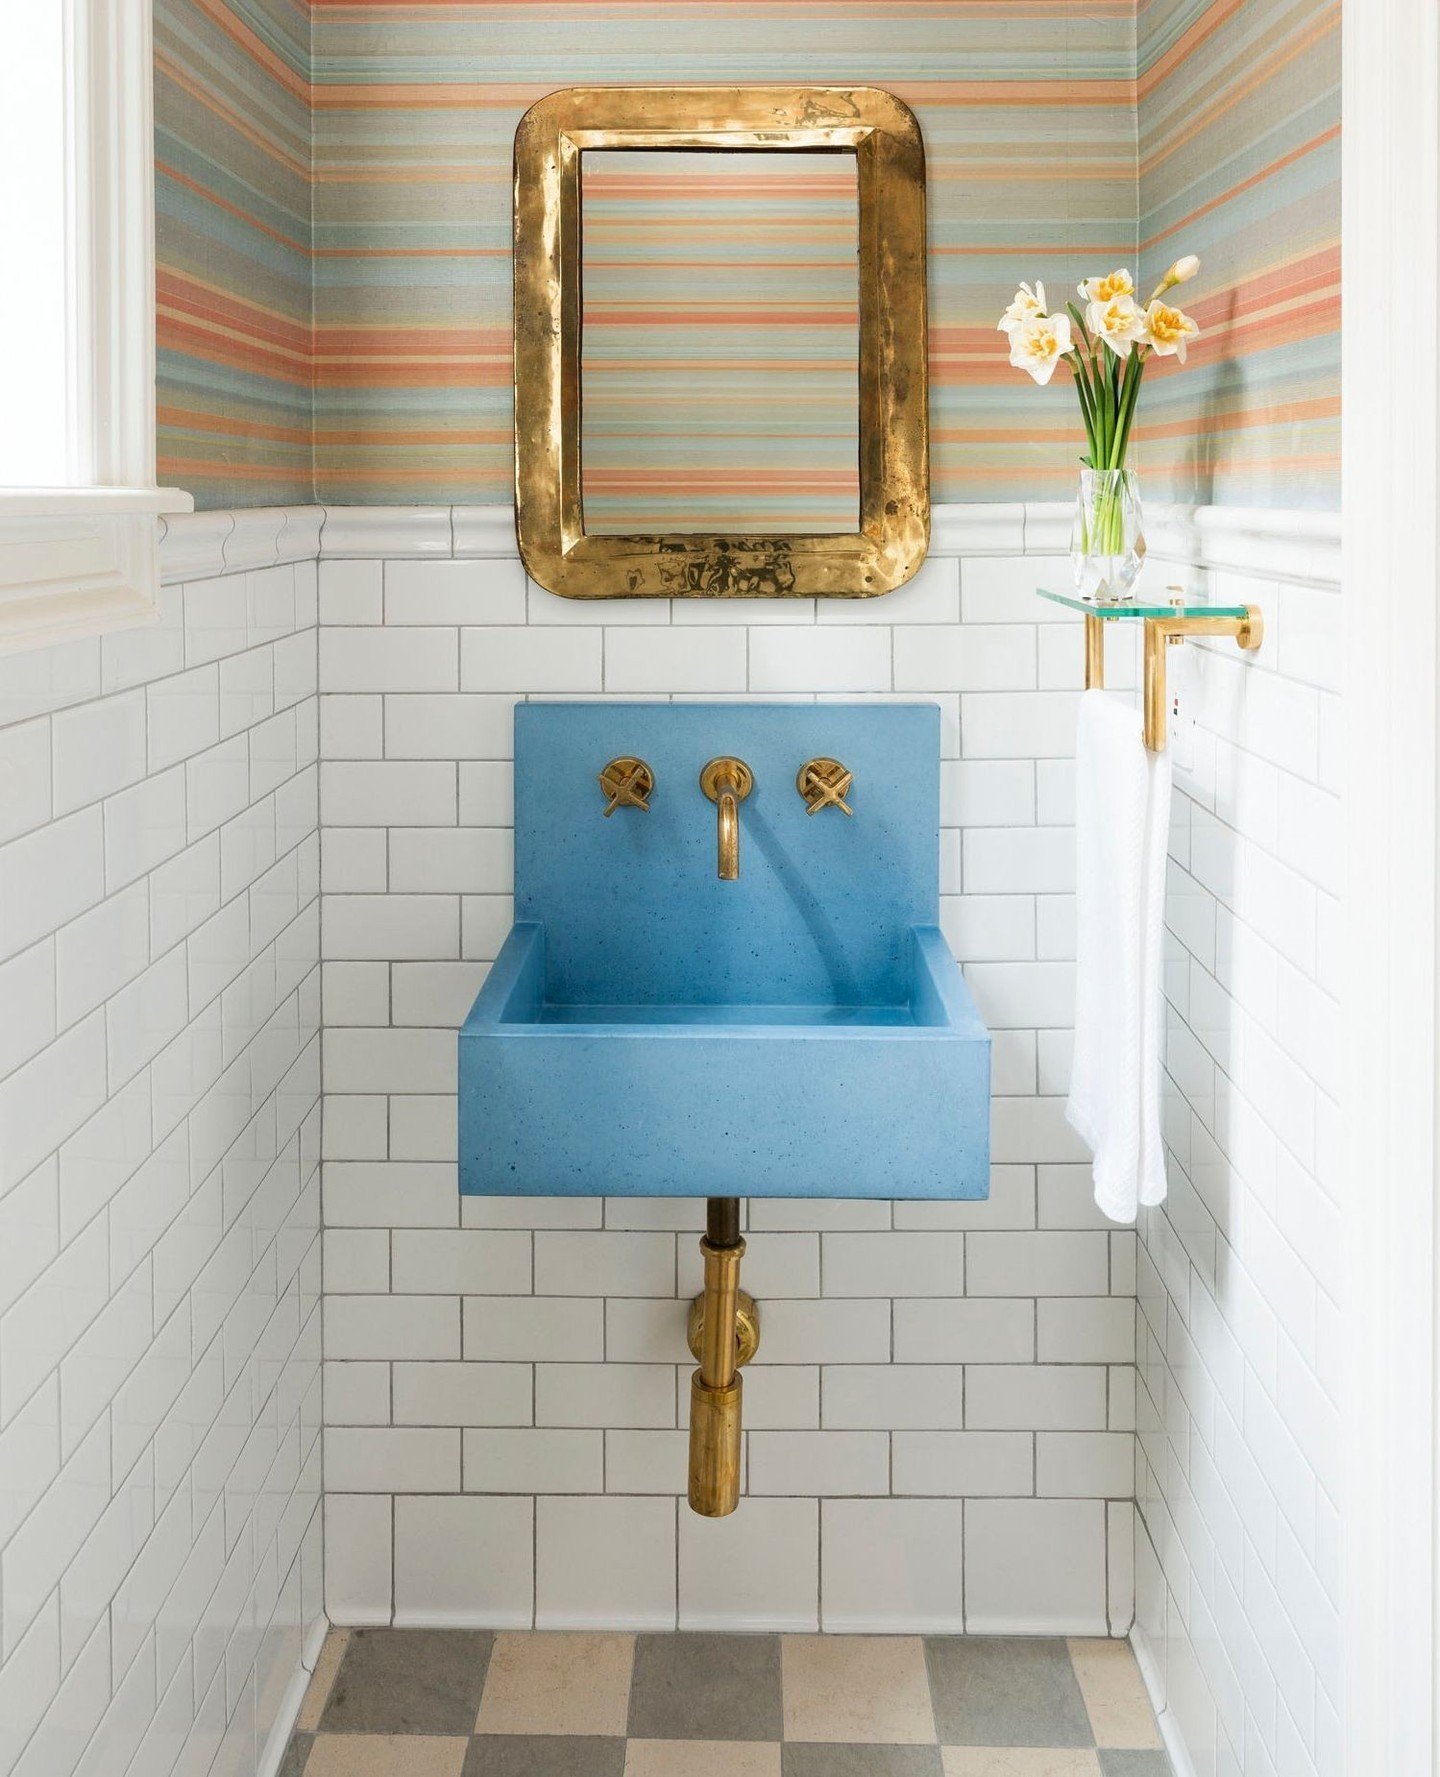 Fun but subtle, pool bathroom featuring Kern.⁠ 💧⁠
⁠
&quot;While these spaces are fun to design, they are (more importantly) immensely practical. They offer a seamless transition from poolside fun to indoor comfort.&quot;⁠ - @laurenhaskettdesign⁠
⁠⁠
